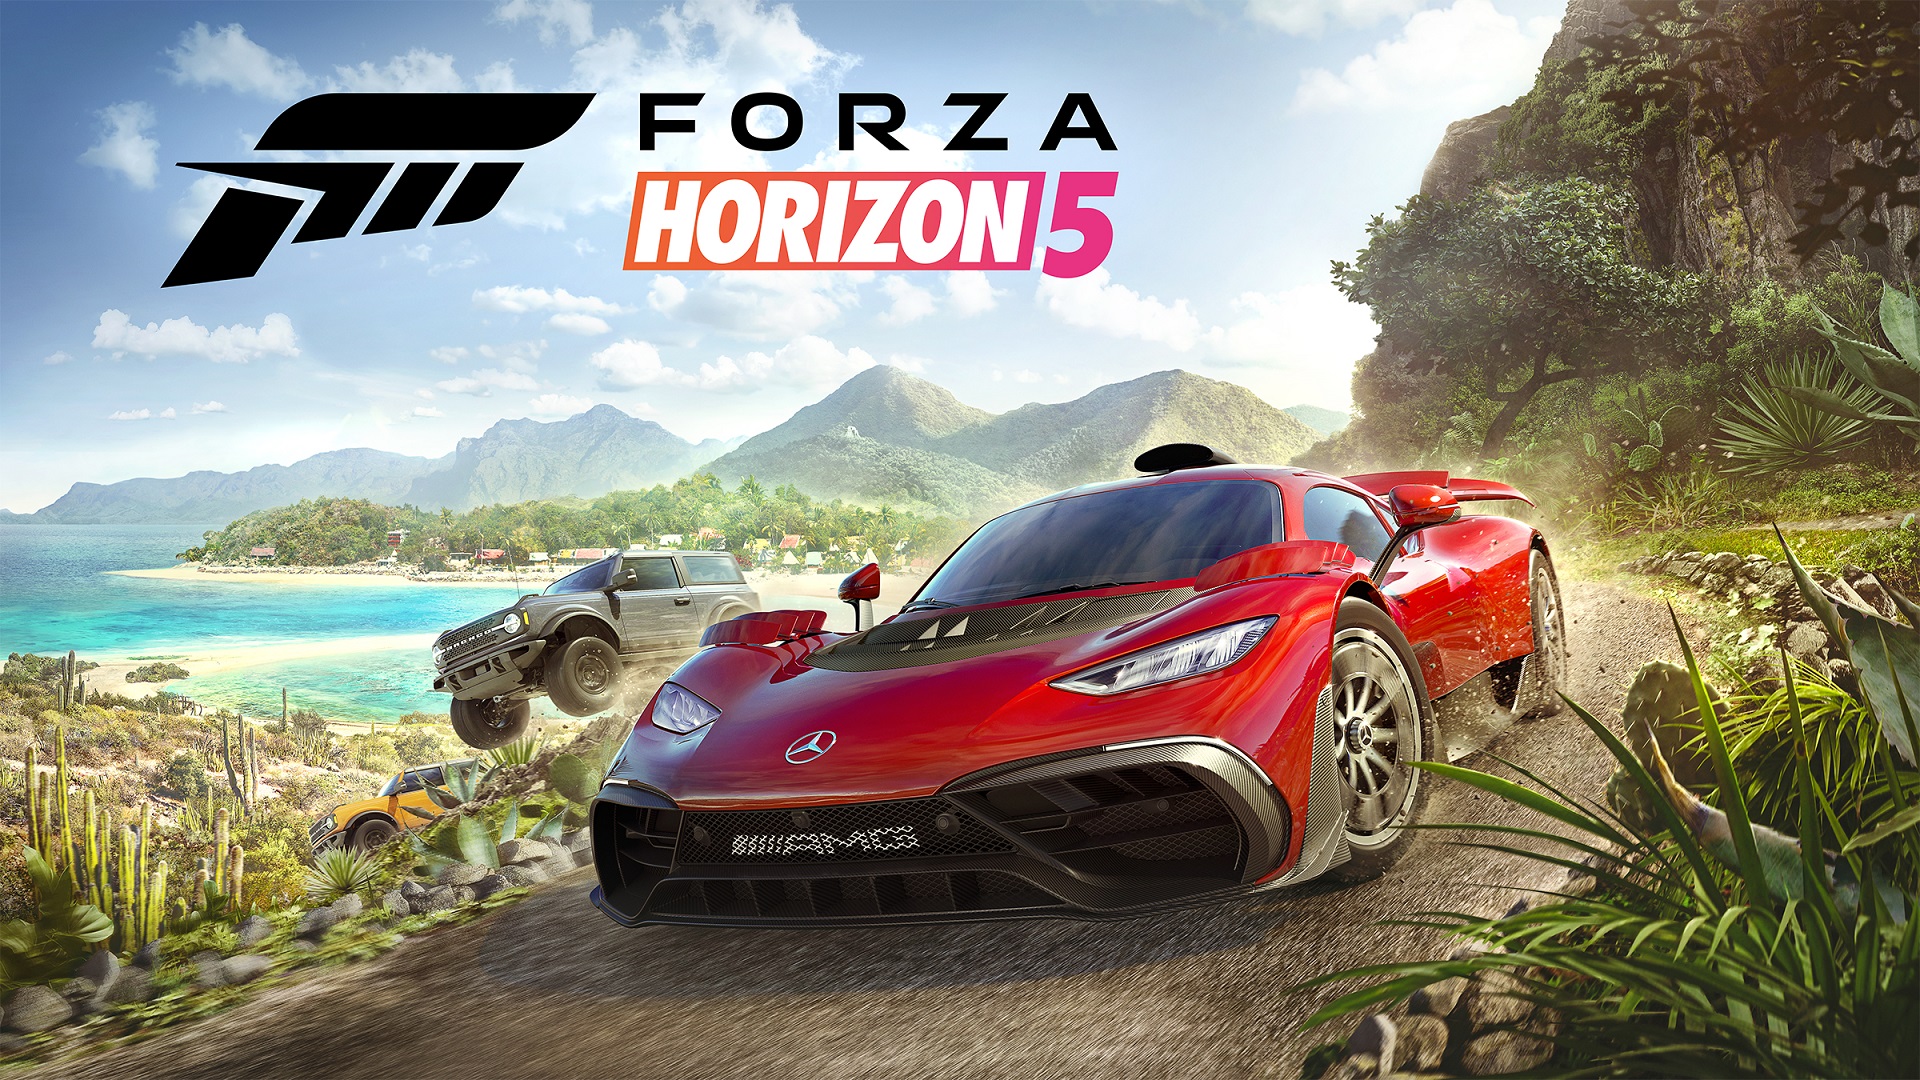 Forza Horizon 5 news, advice, guides and help